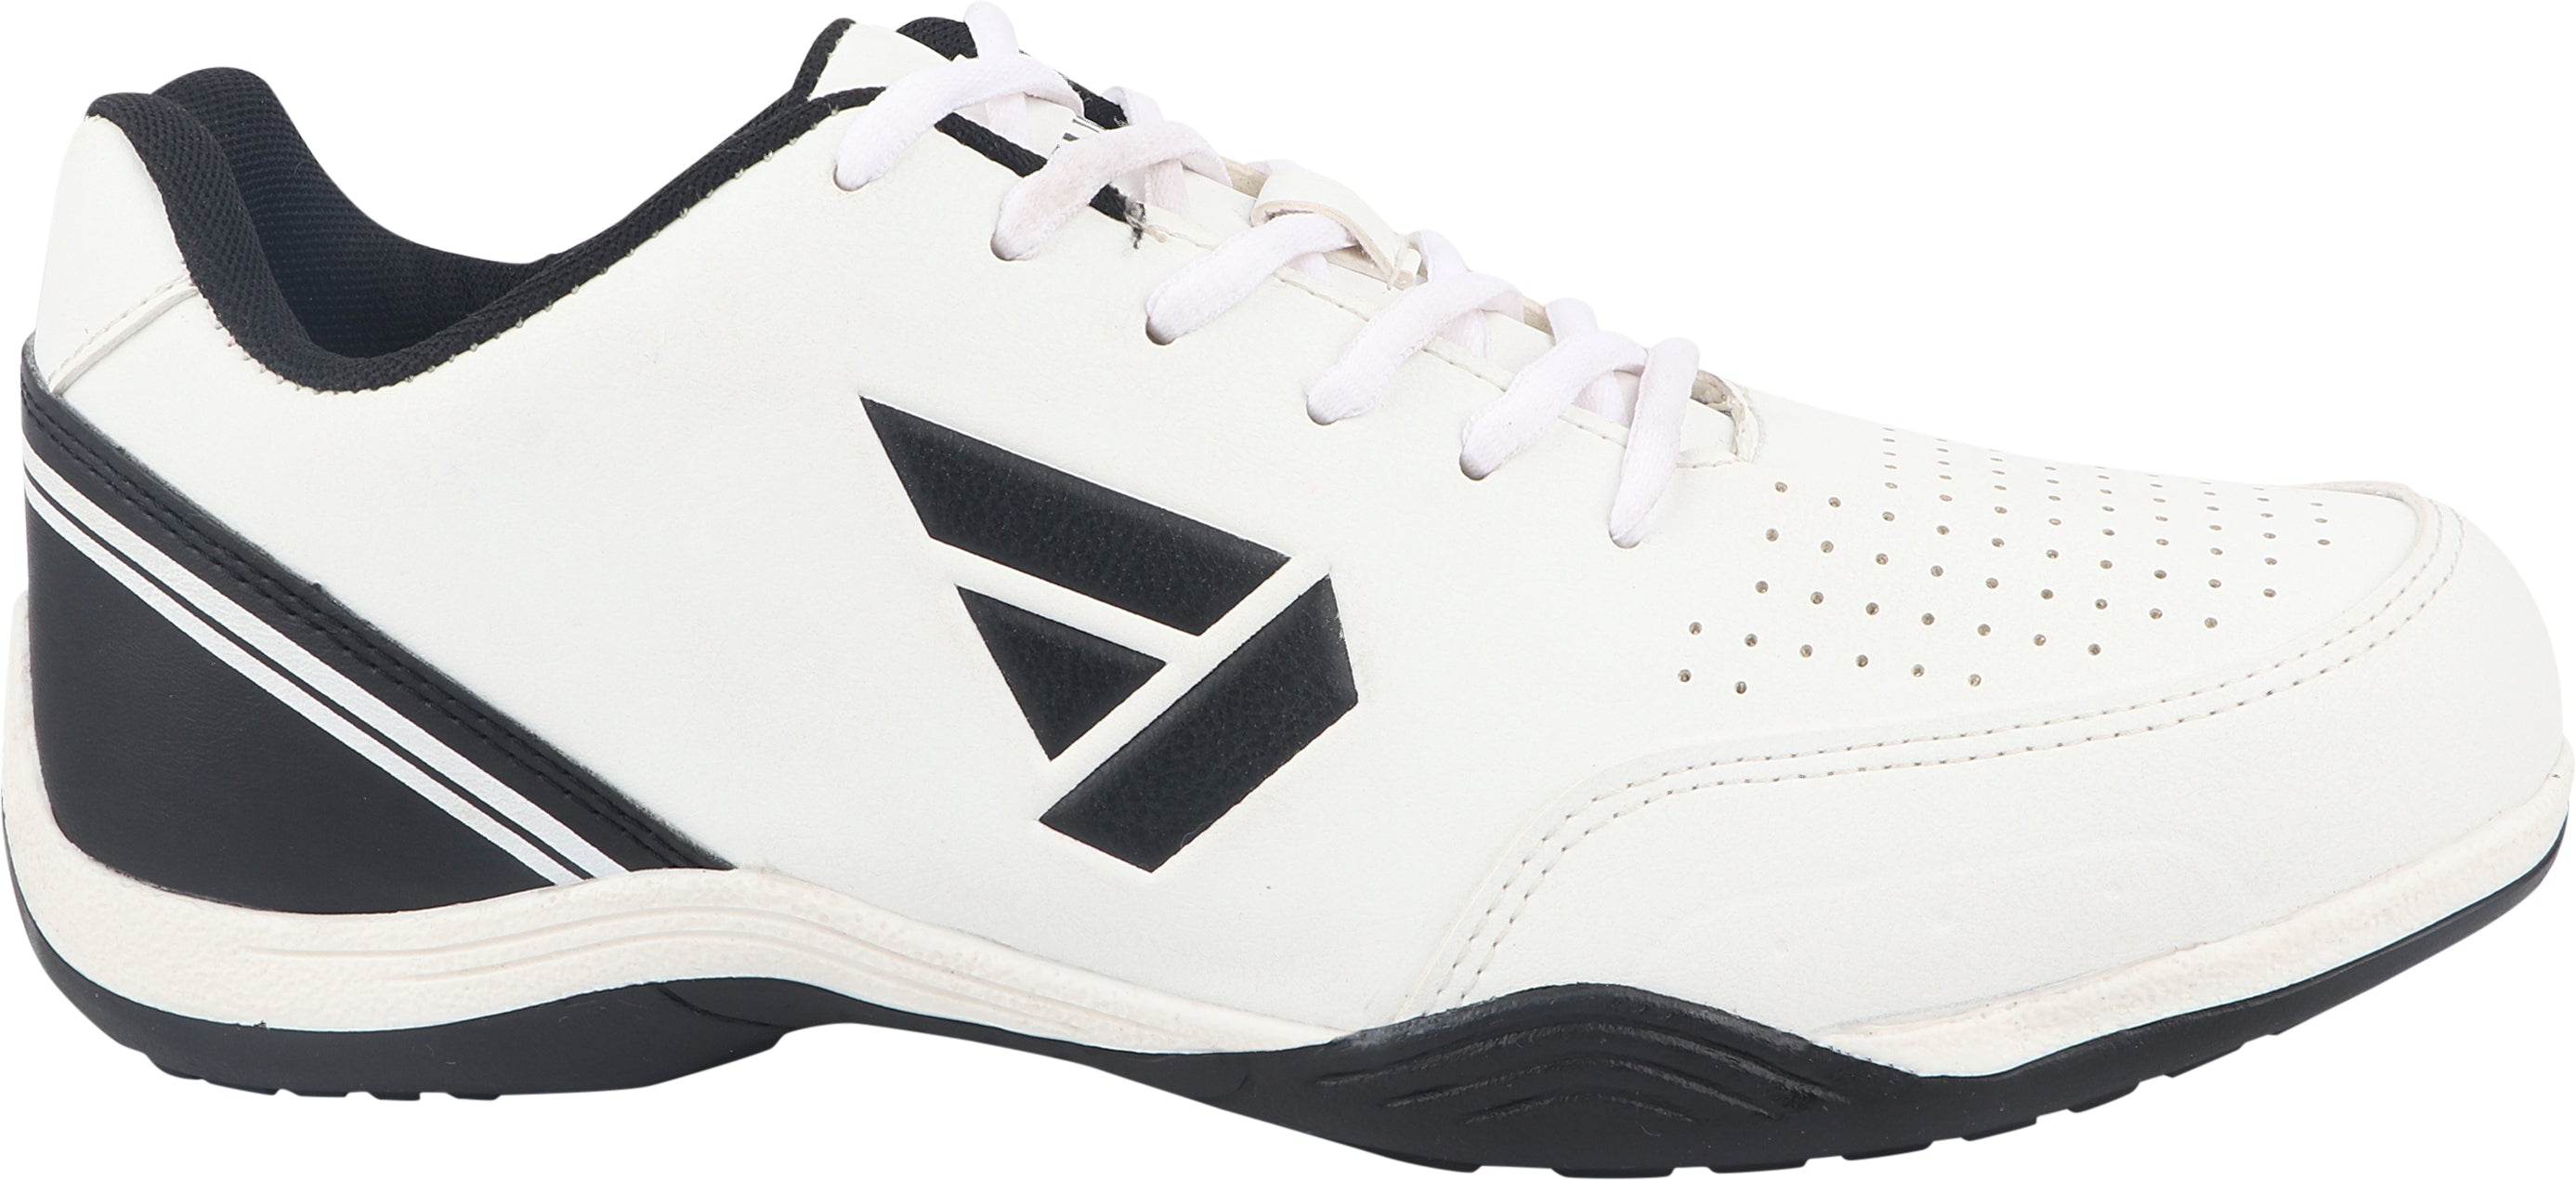 Fuel Ultima Sports Shoes For Men (White)